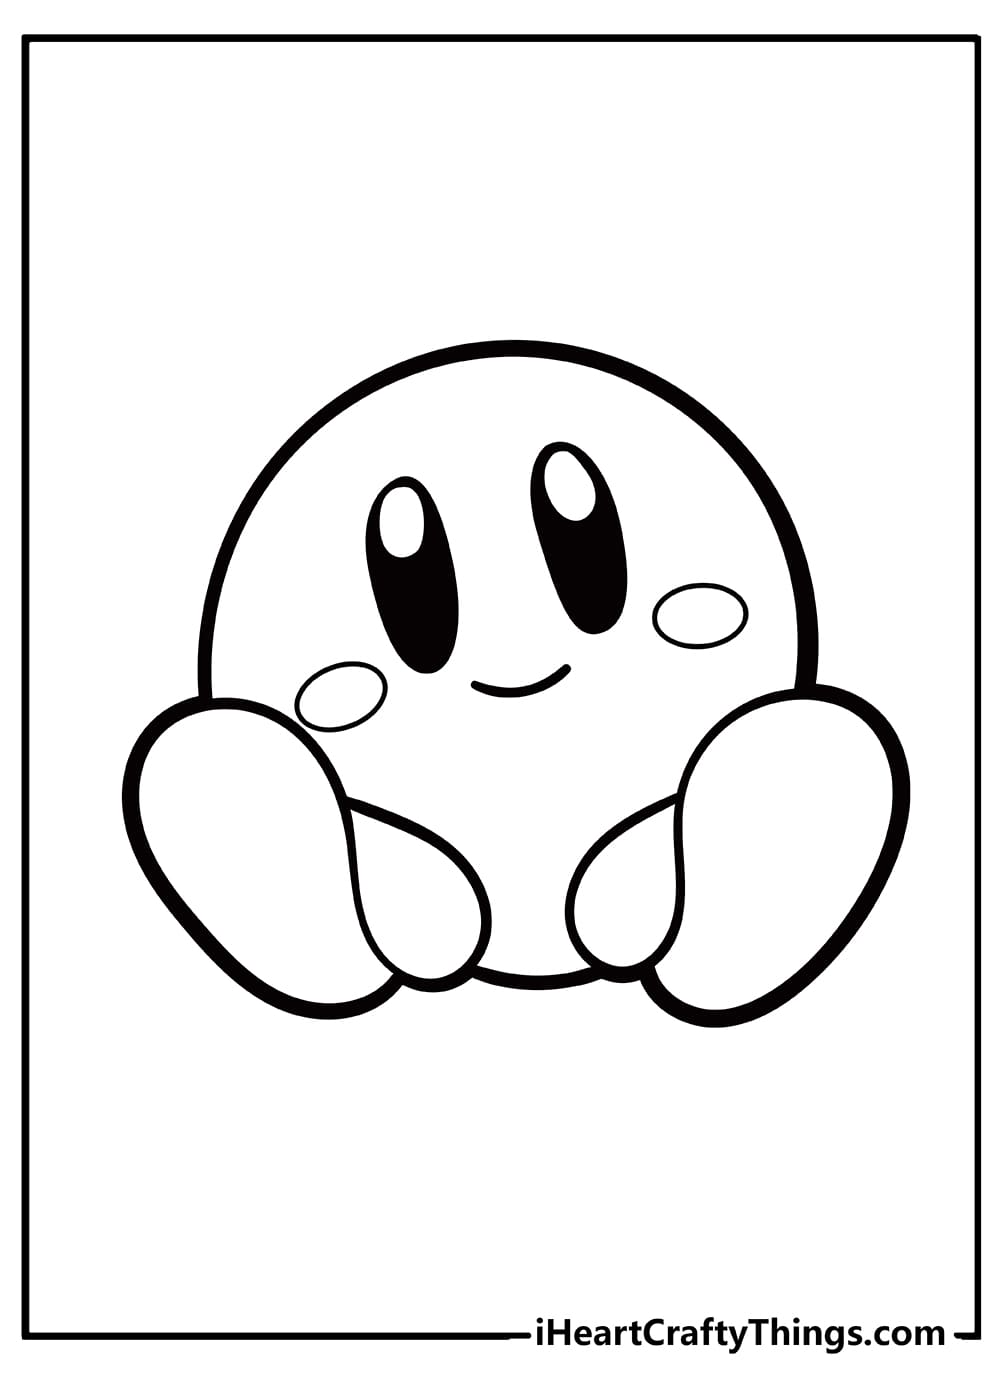 Kirby Image Cute For Kids